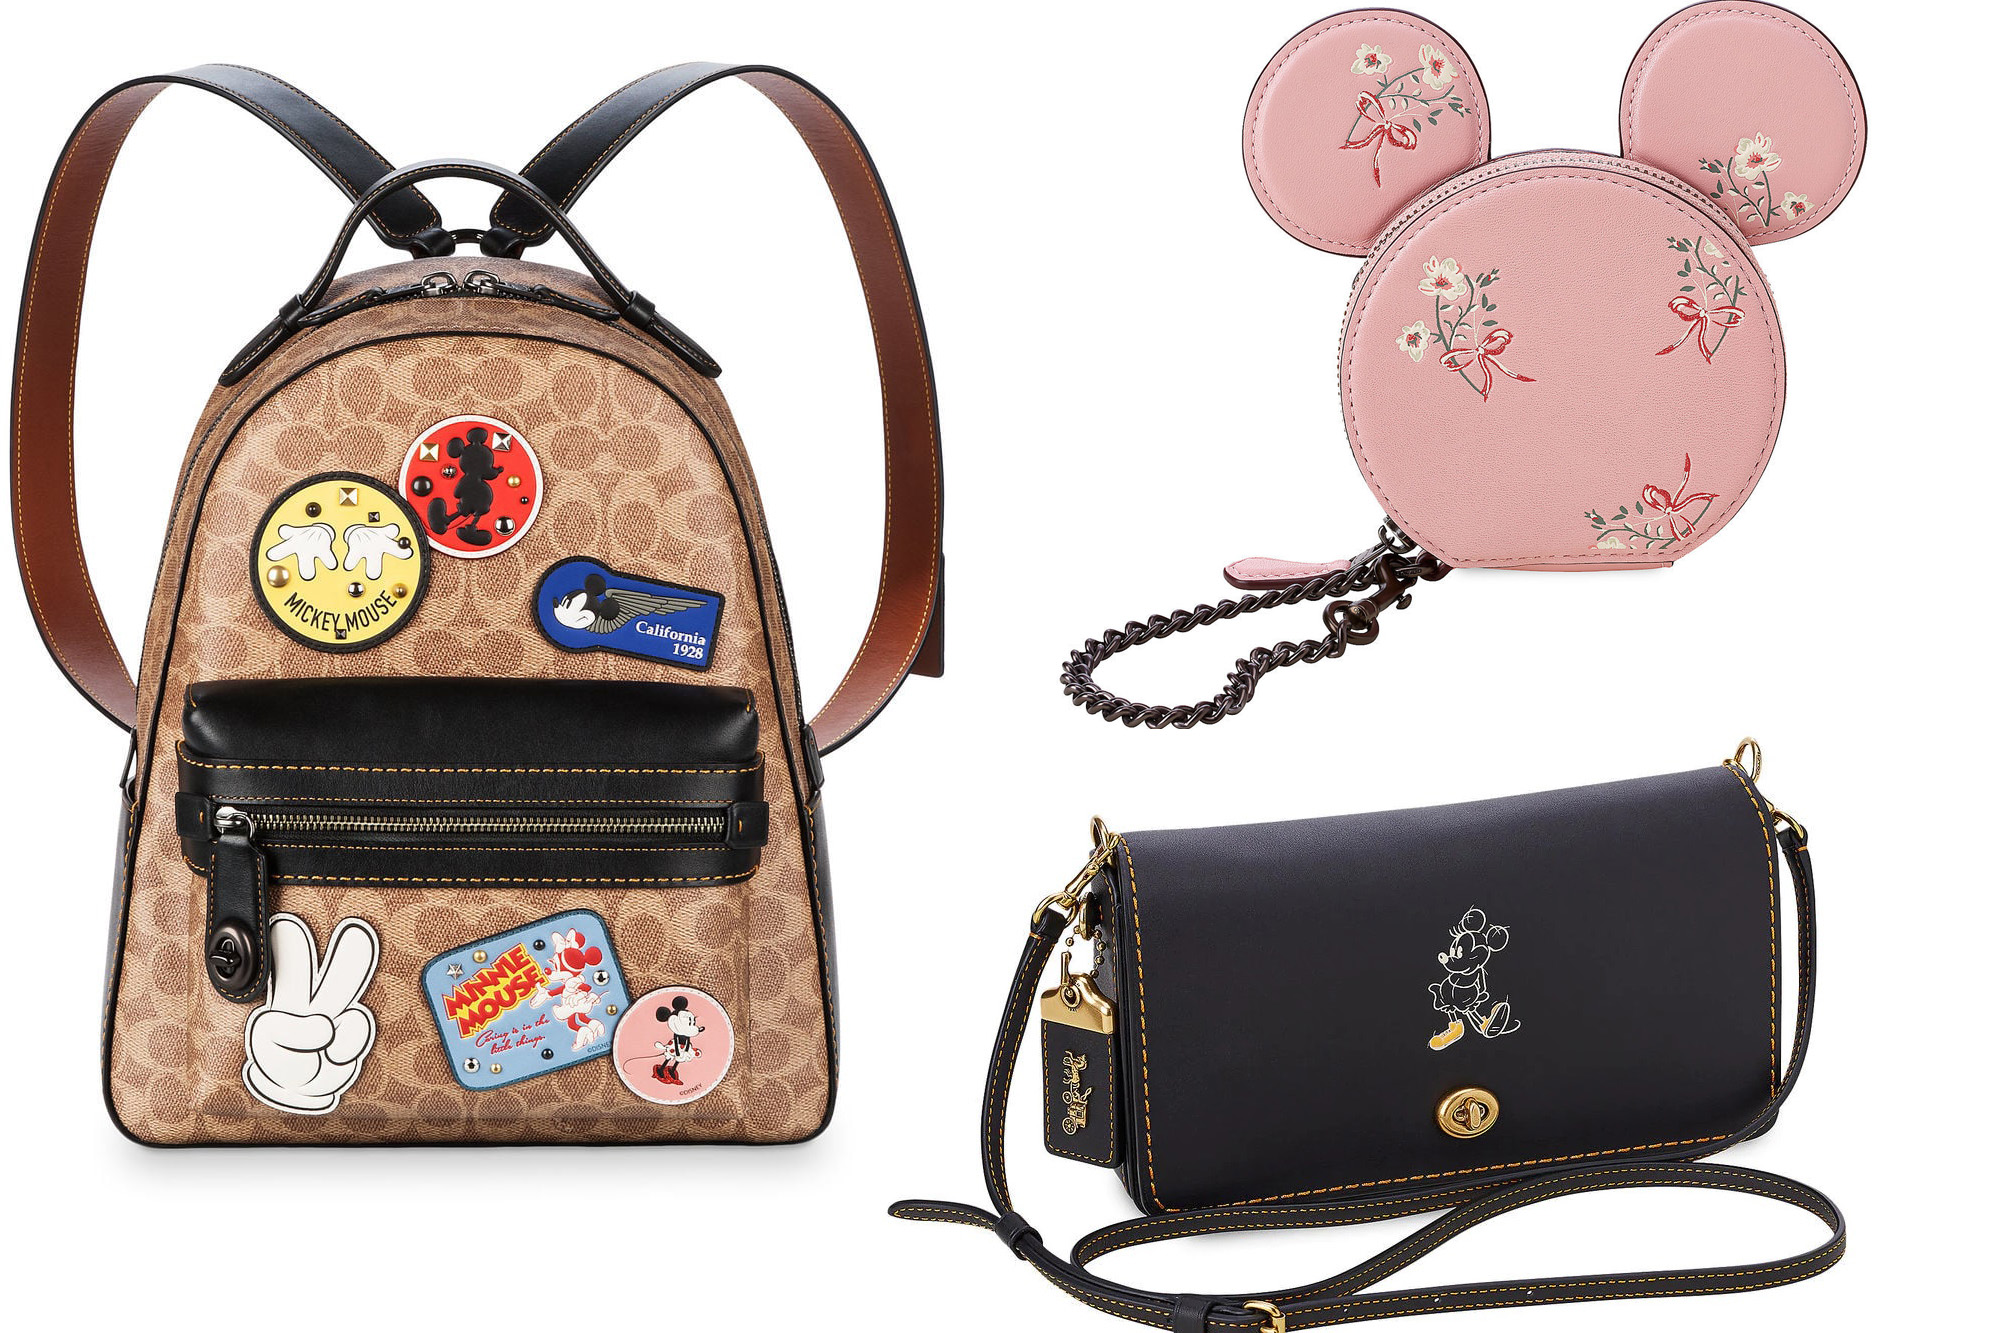 New Online Exclusive Disney x Coach Handbags and Accessories Arrive on